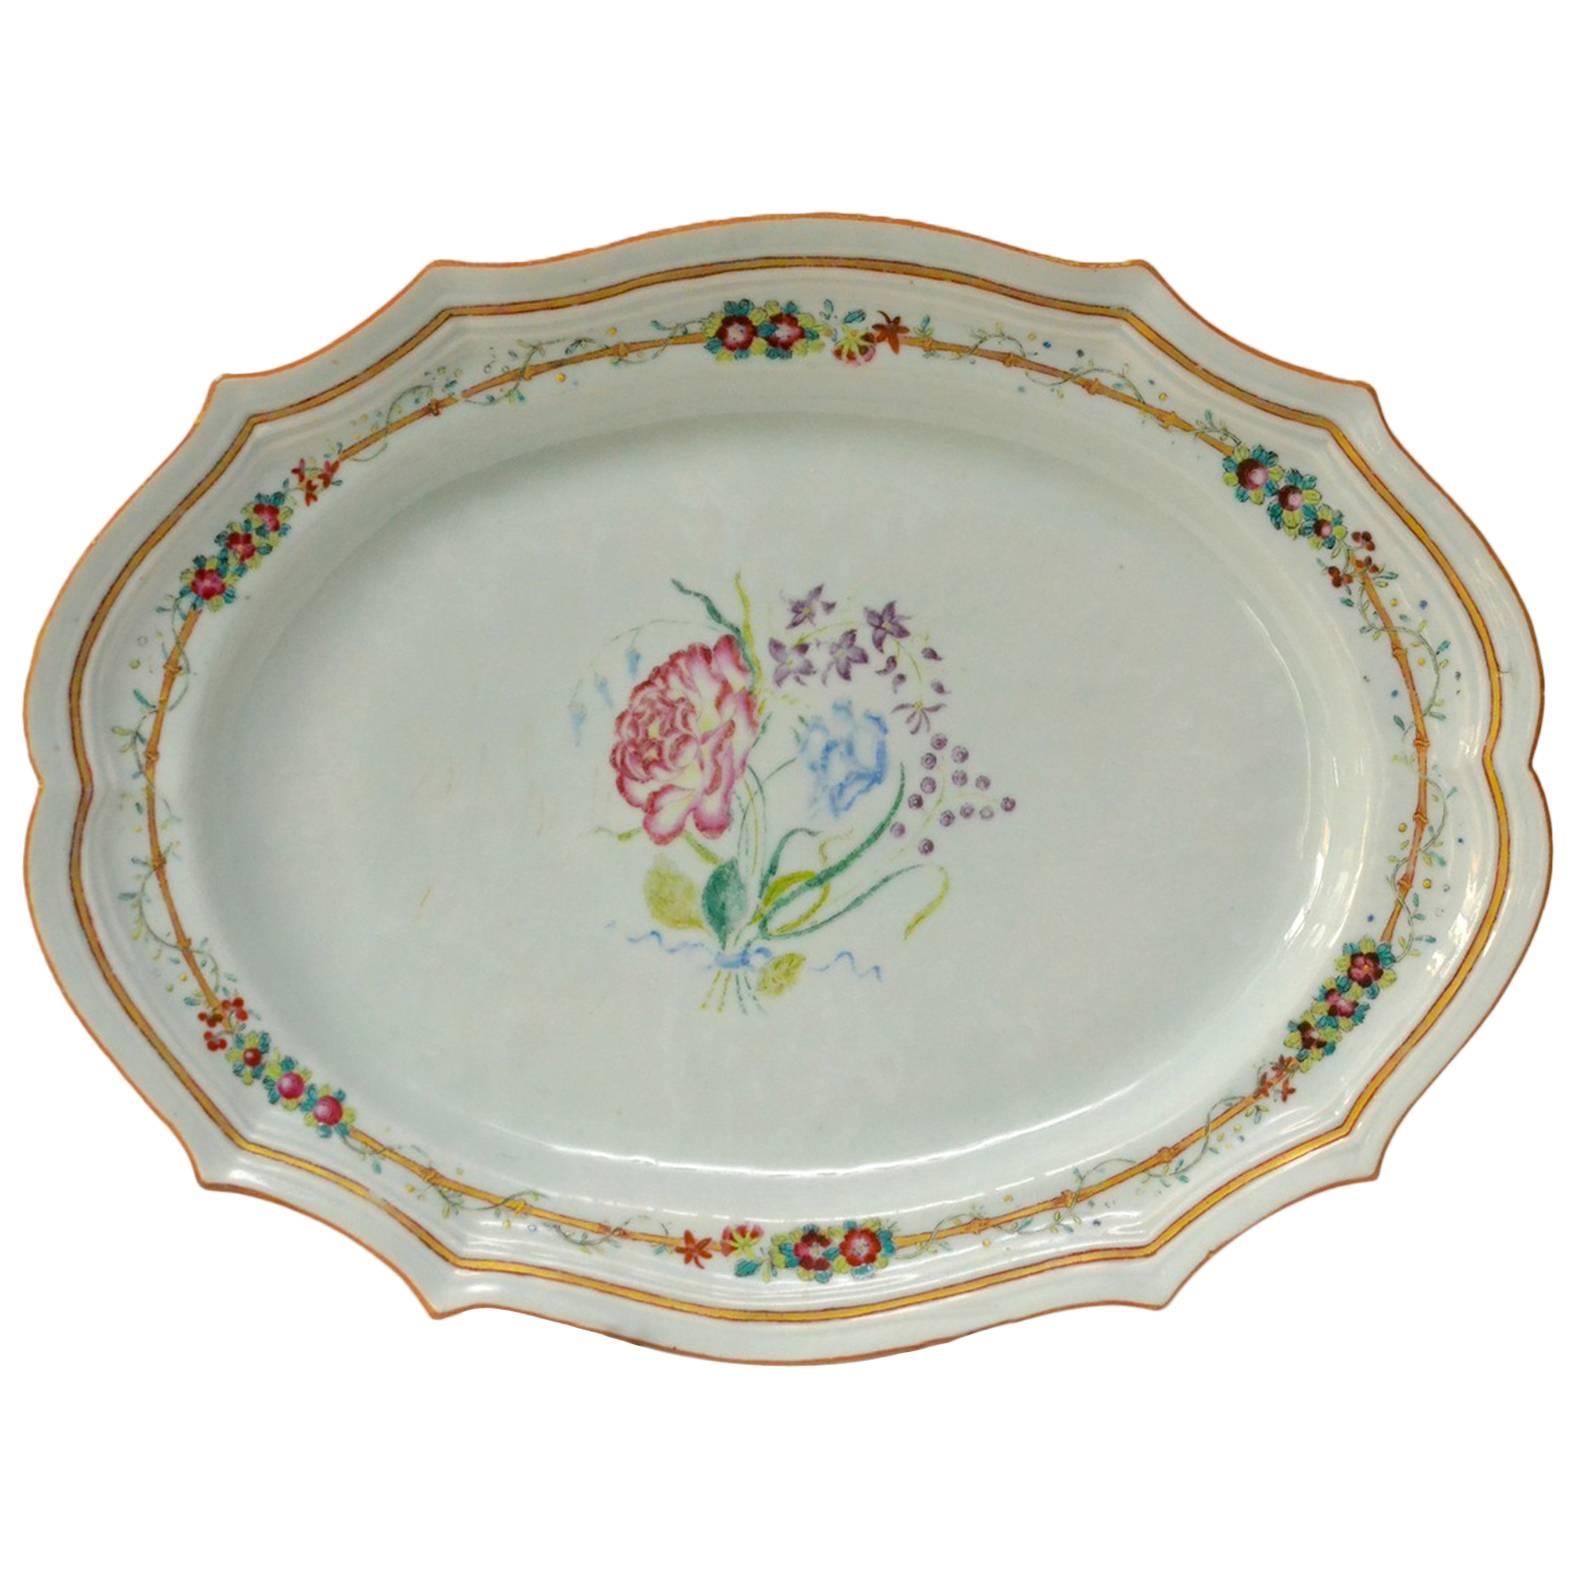 Oval Chinese Famille Rose Tureen Dish, 18th Century